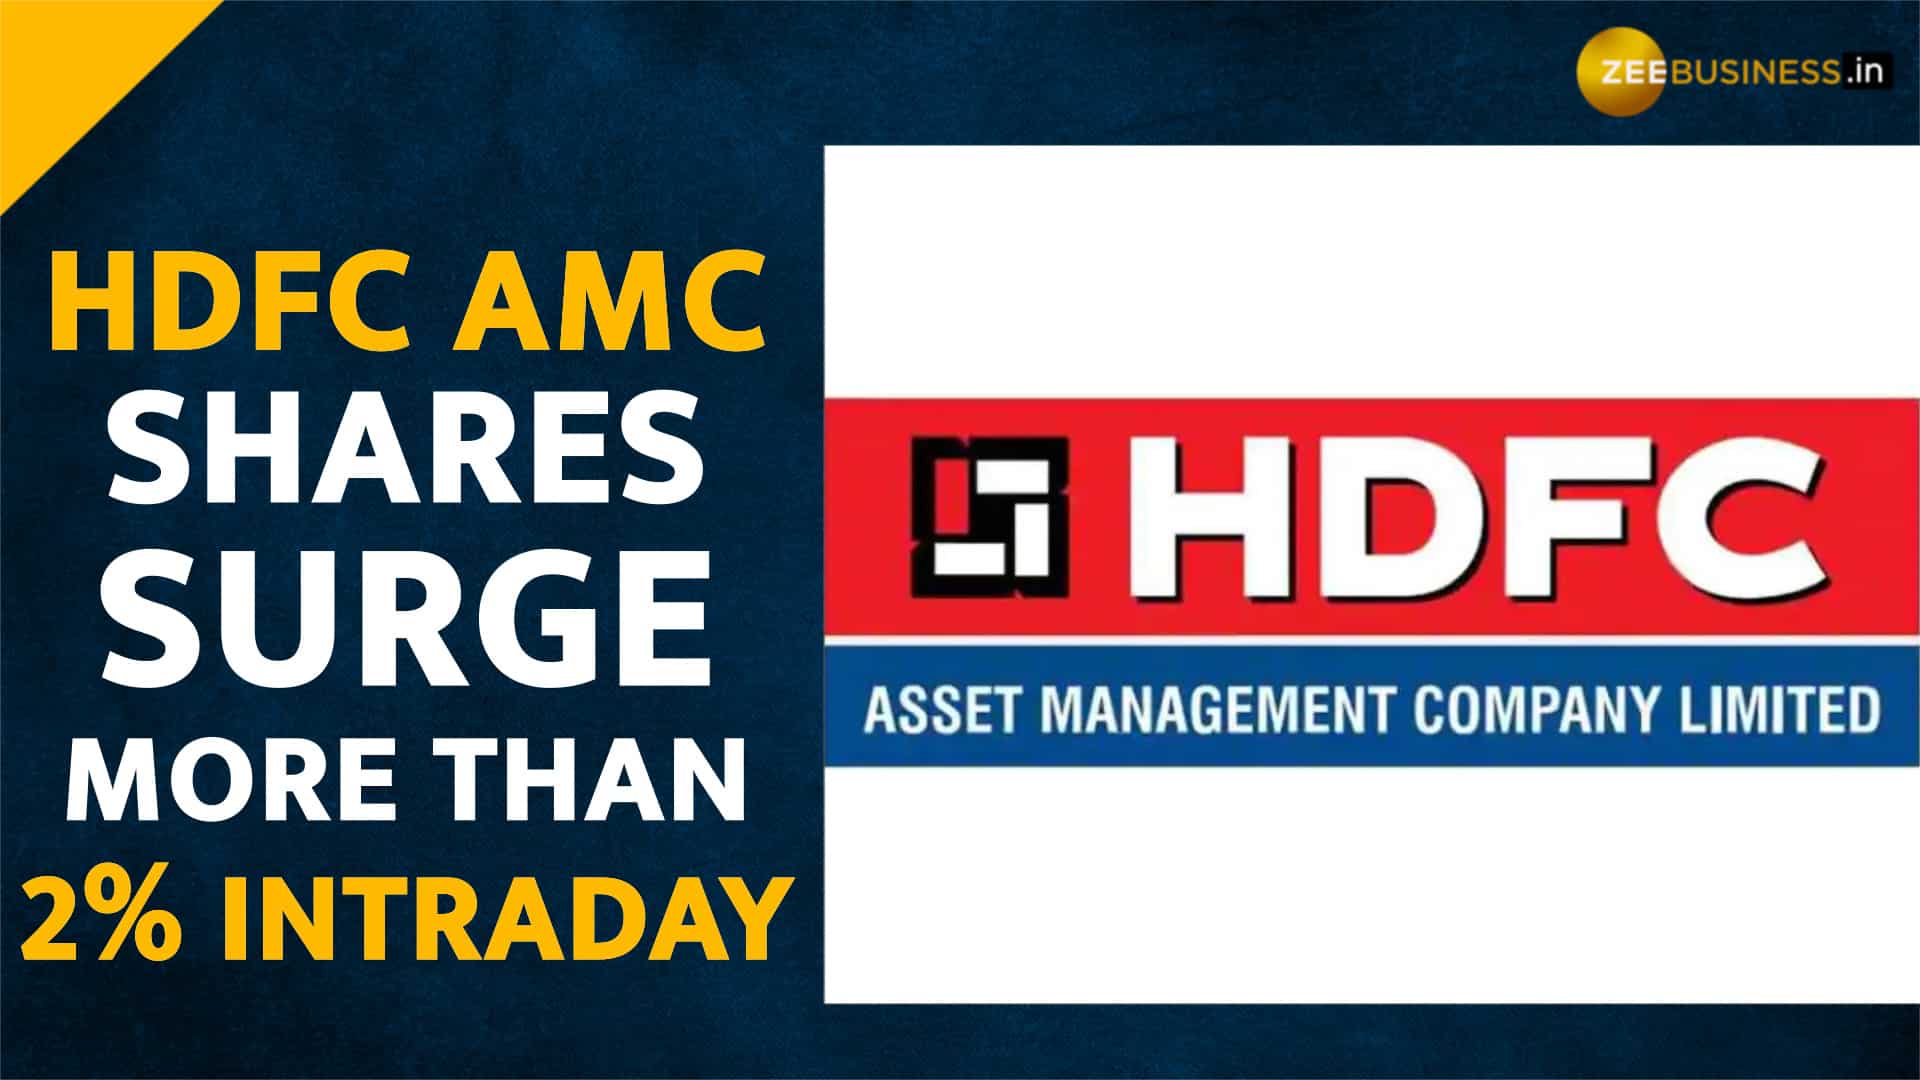 HDFC AMC share surges as Abrdn Investment plans to sell entire 10.2